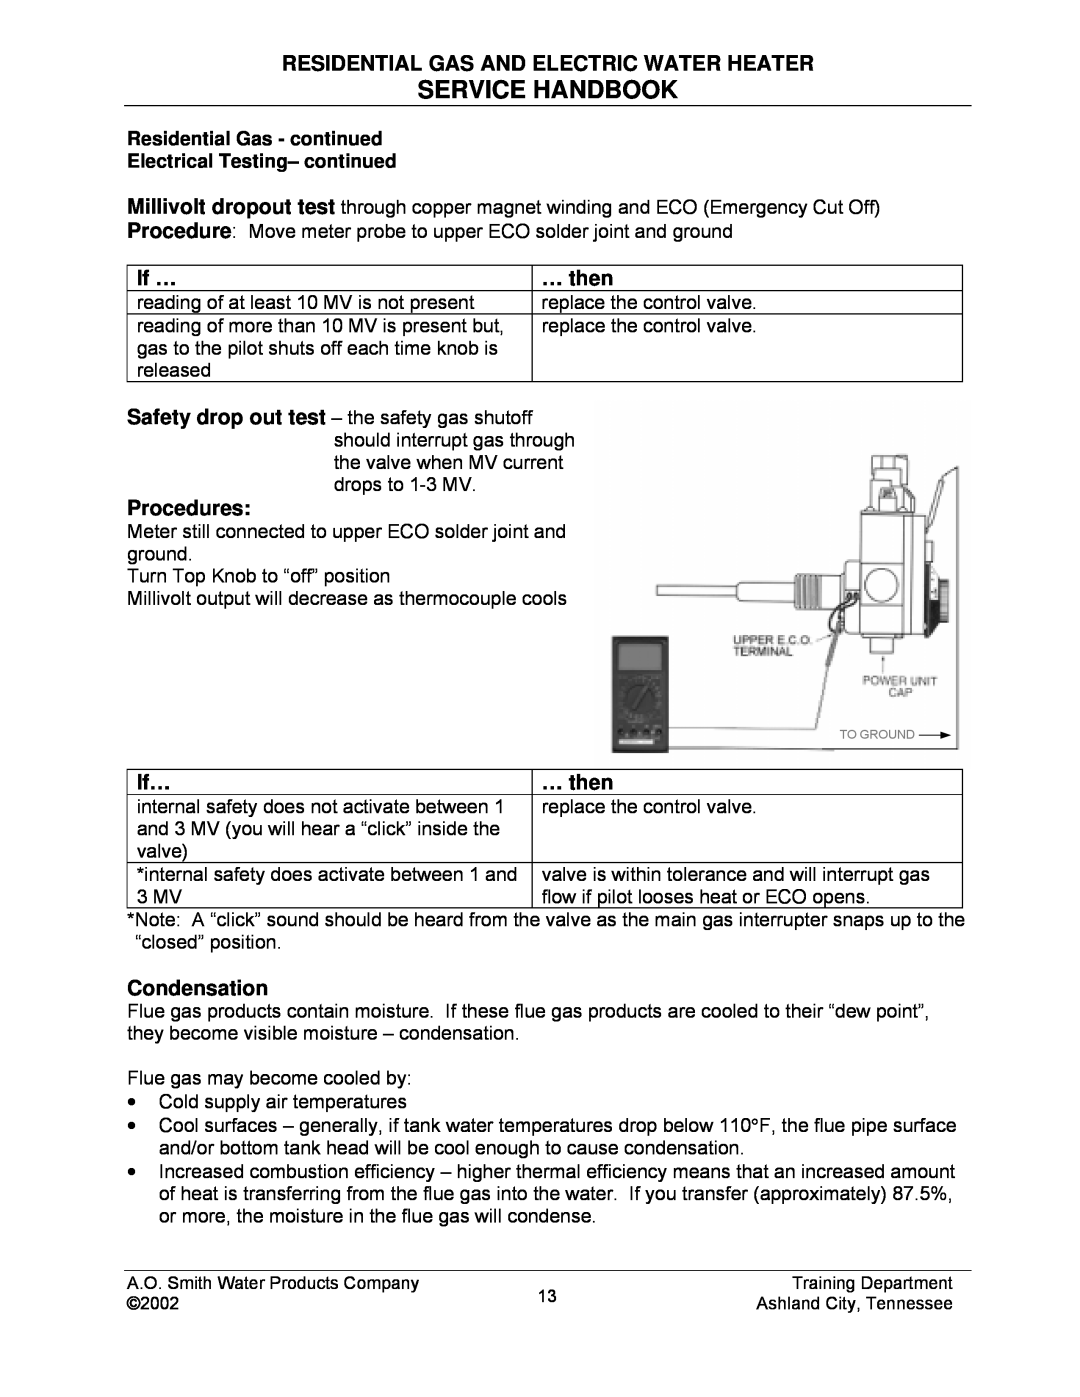 A.O. Smith TC-049-R2 Service Handbook, Residential Gas And Electric Water Heater, If …, … then, Procedures, Condensation 